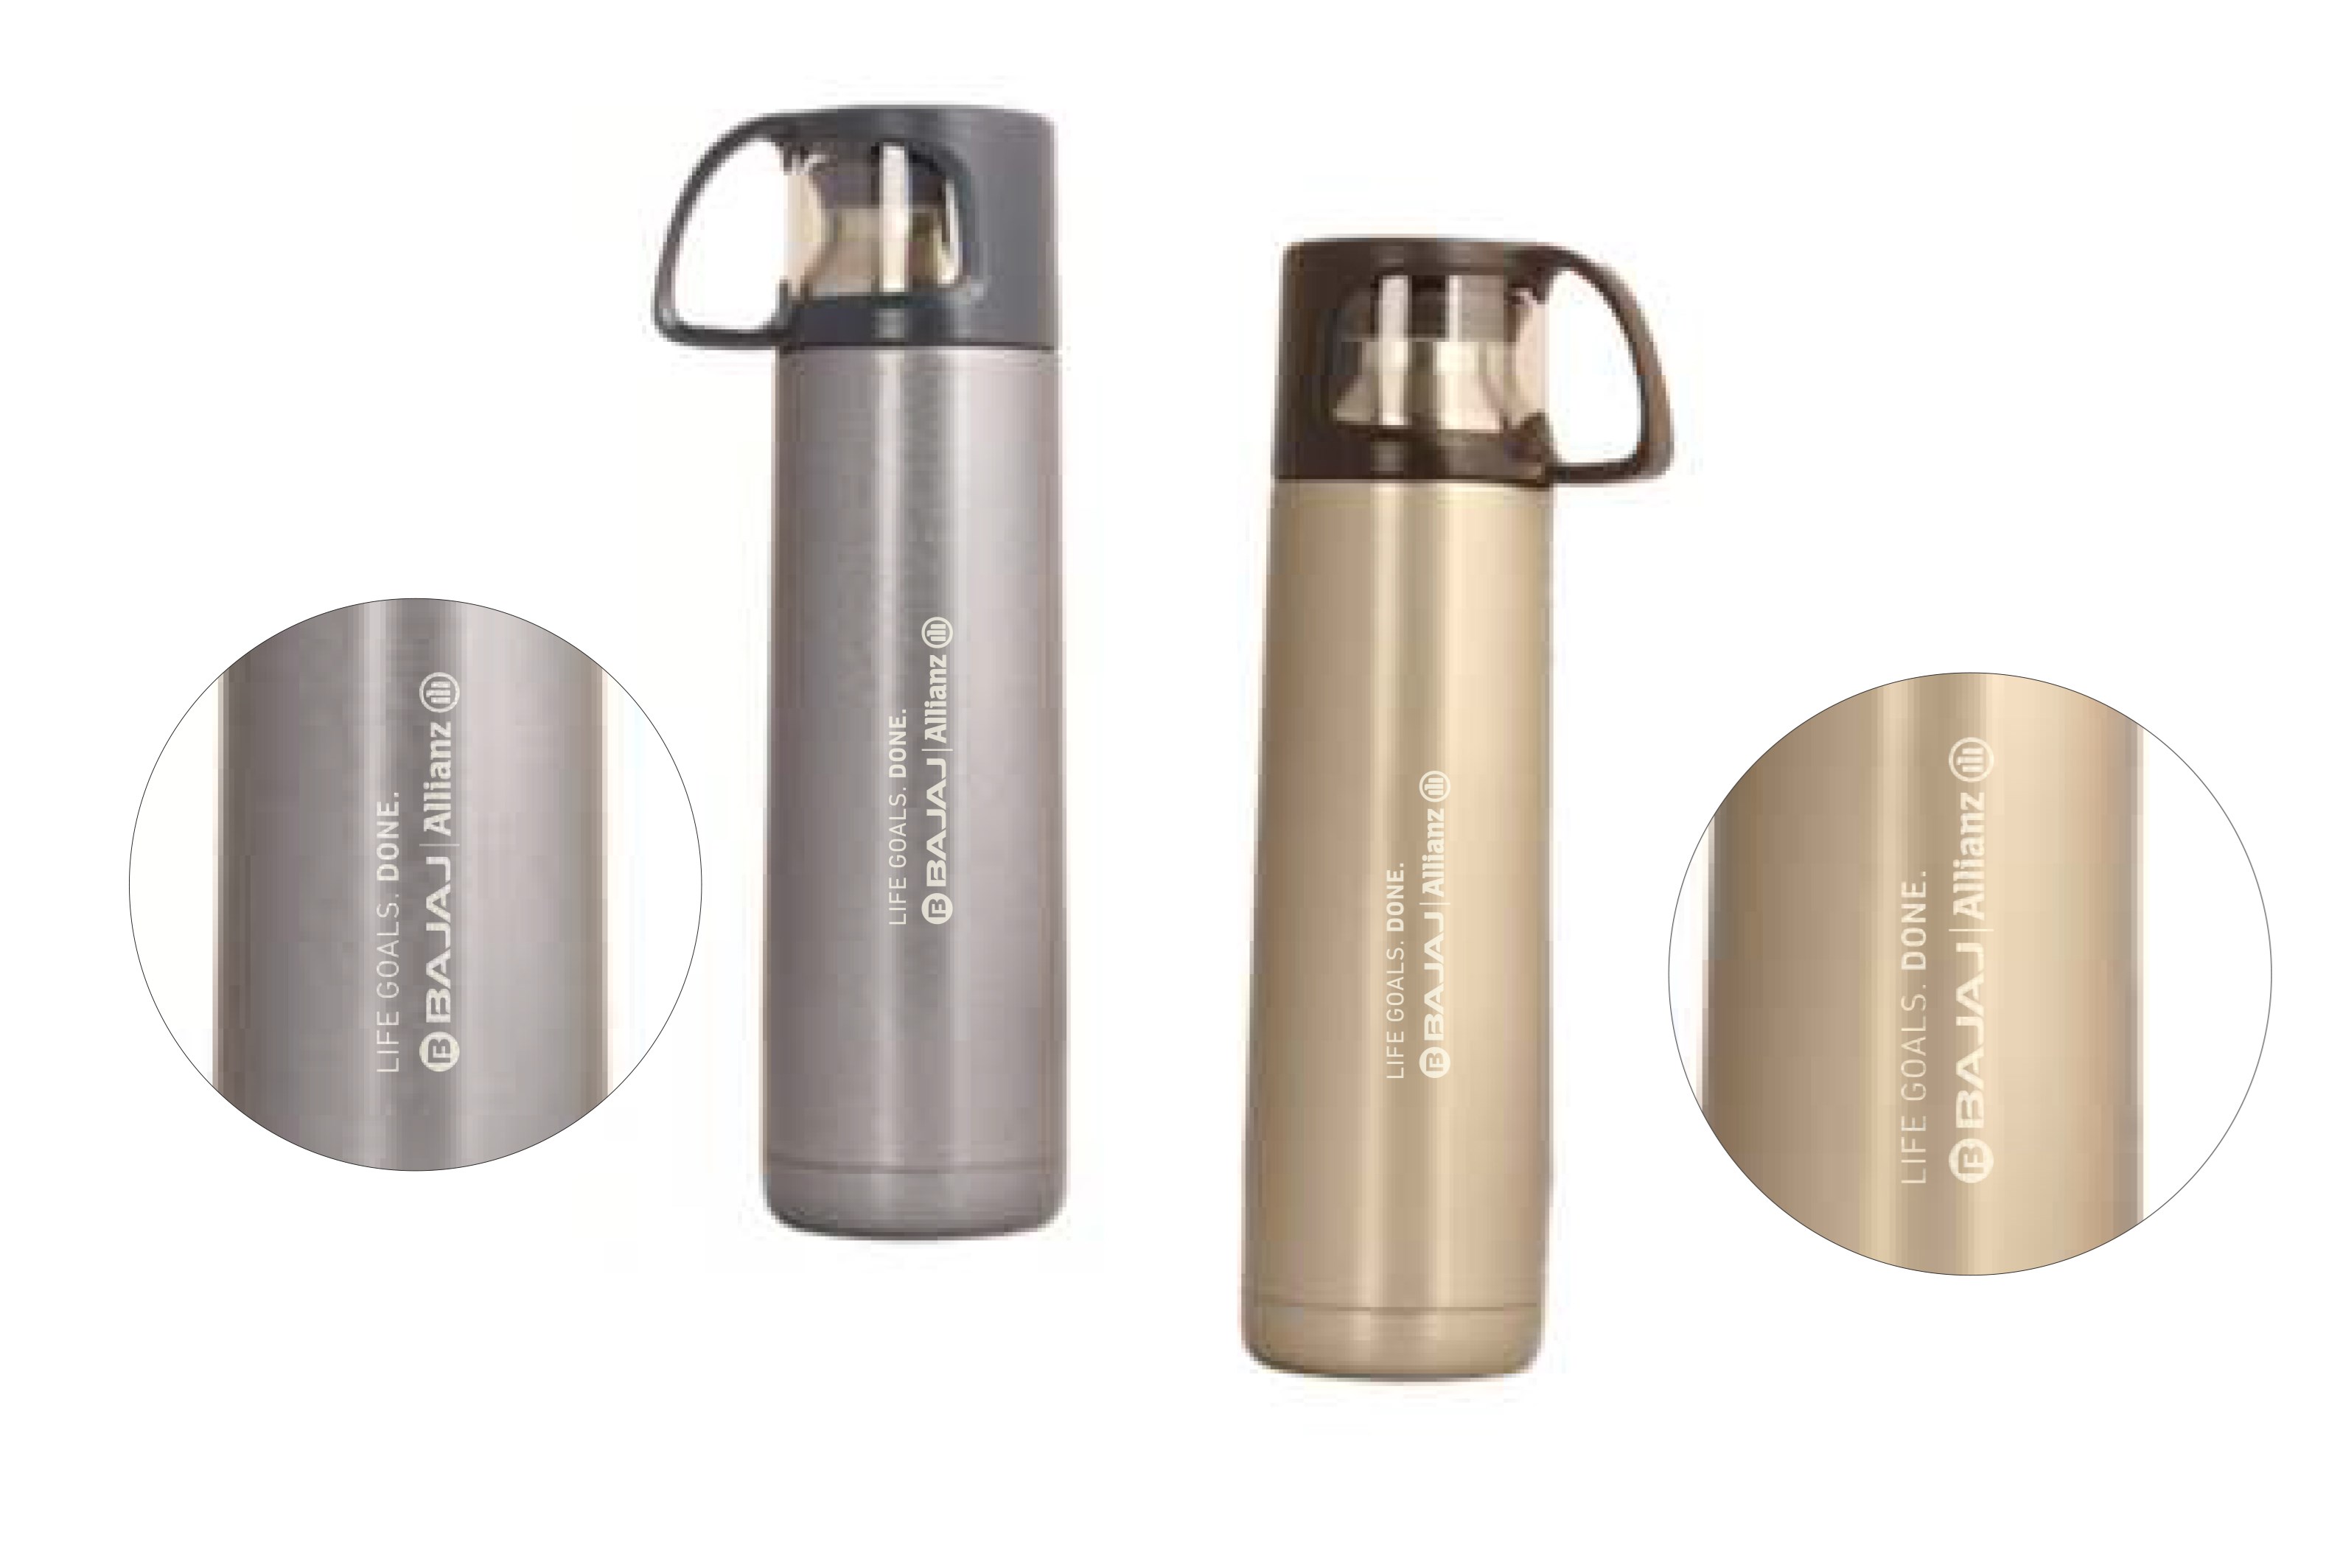 Insulated Double Wall Flask with Cup